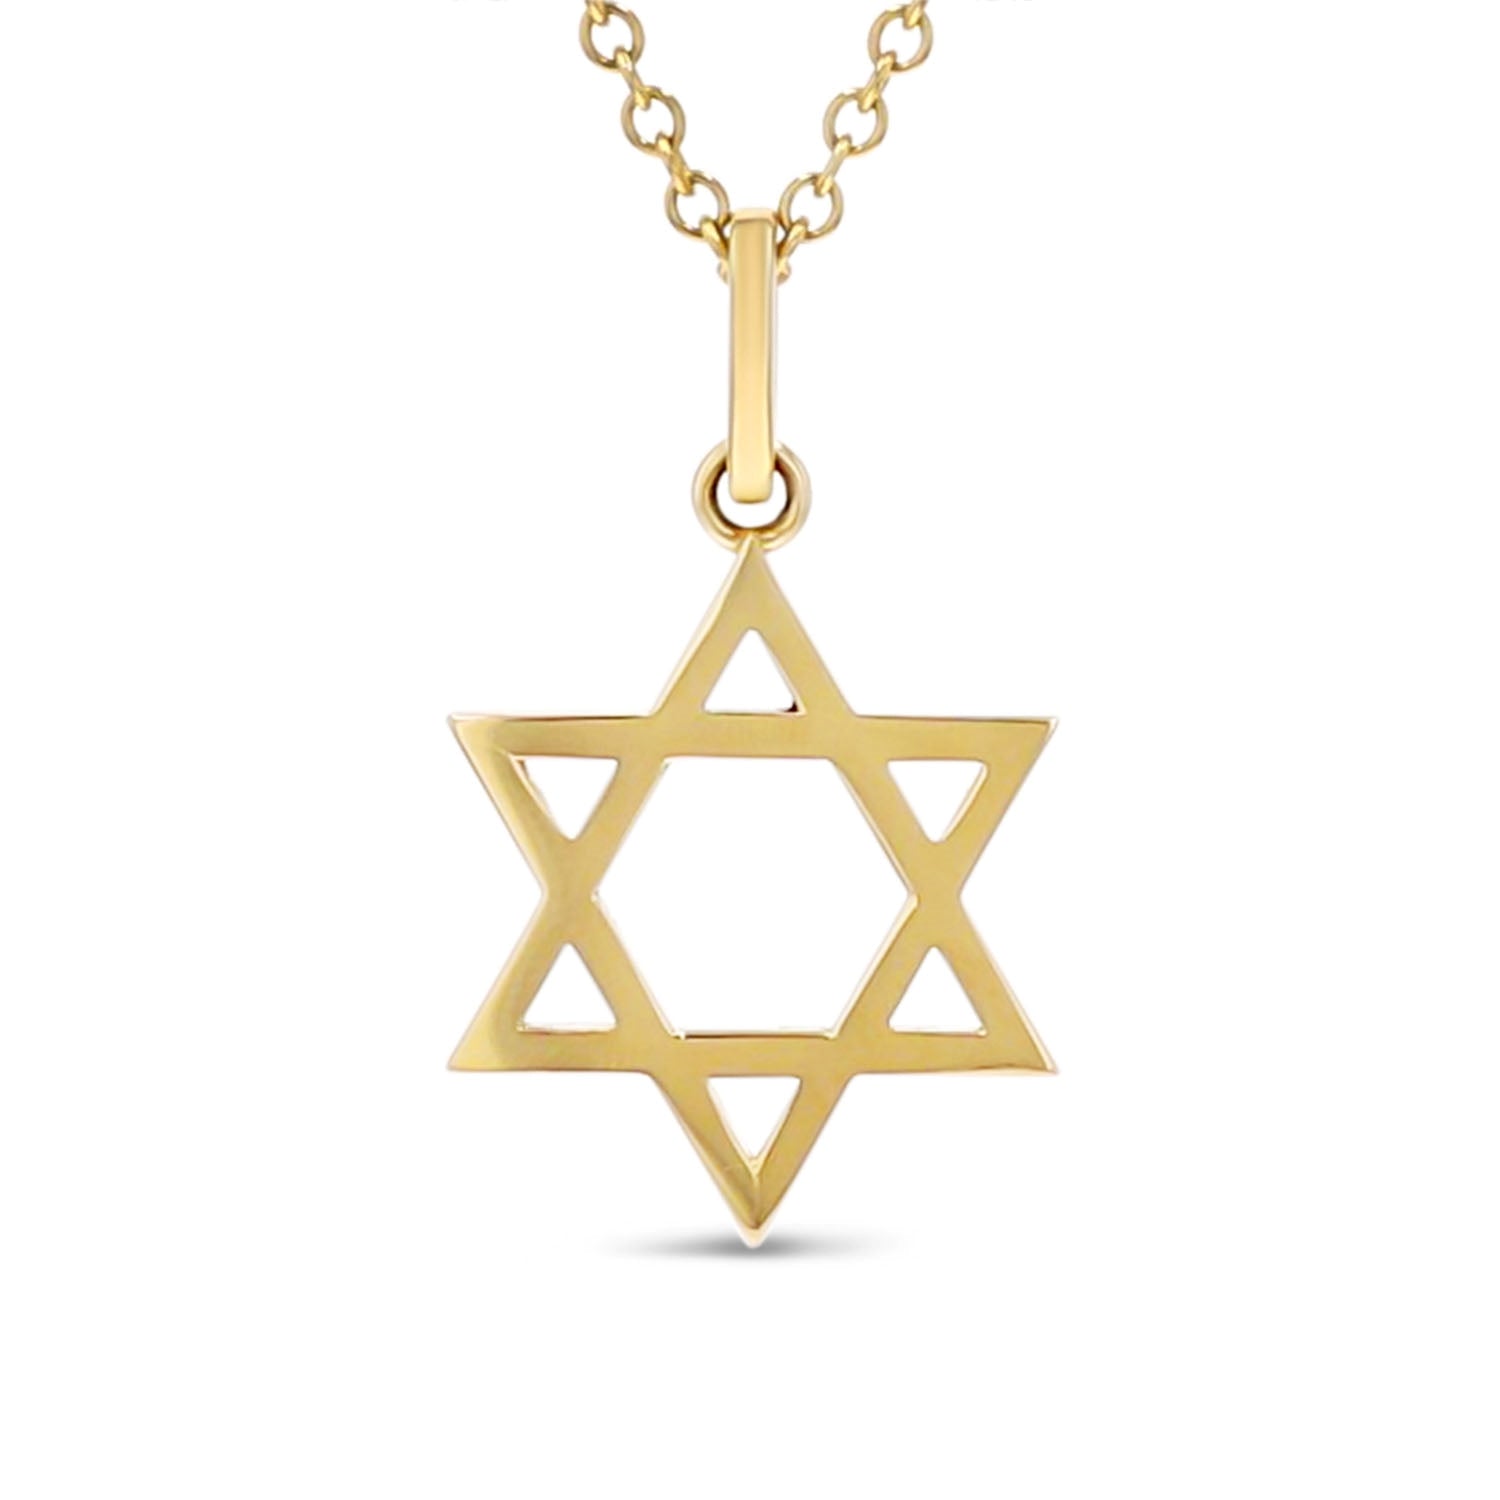 14k Gold 22mm Star of David Pendant on Link Chain Necklace